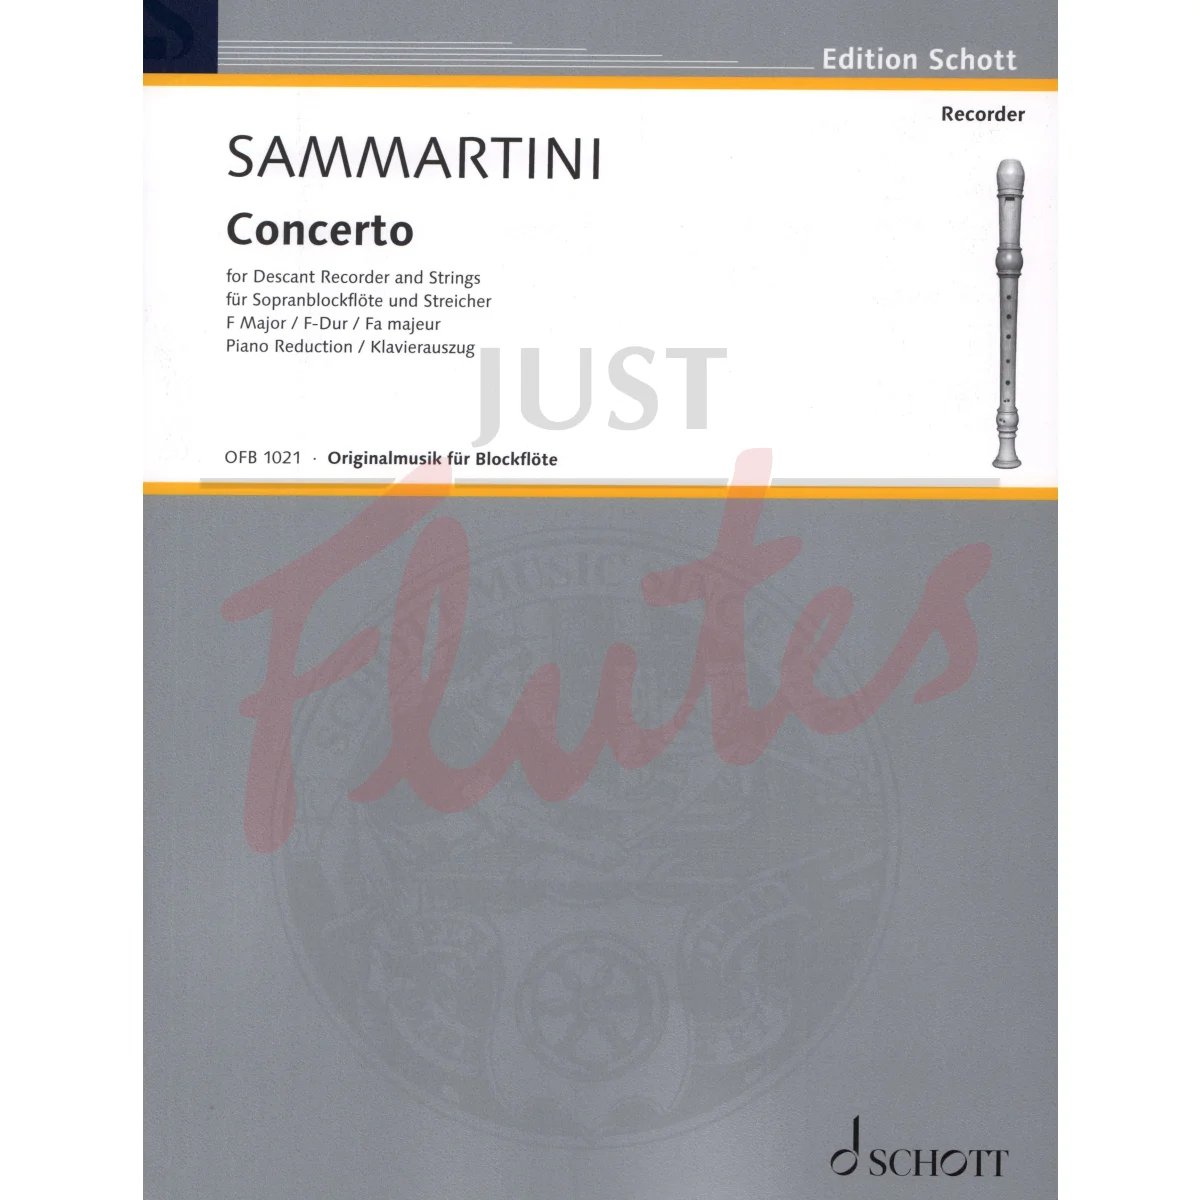 Concerto in F major for Descant Recorder and Piano